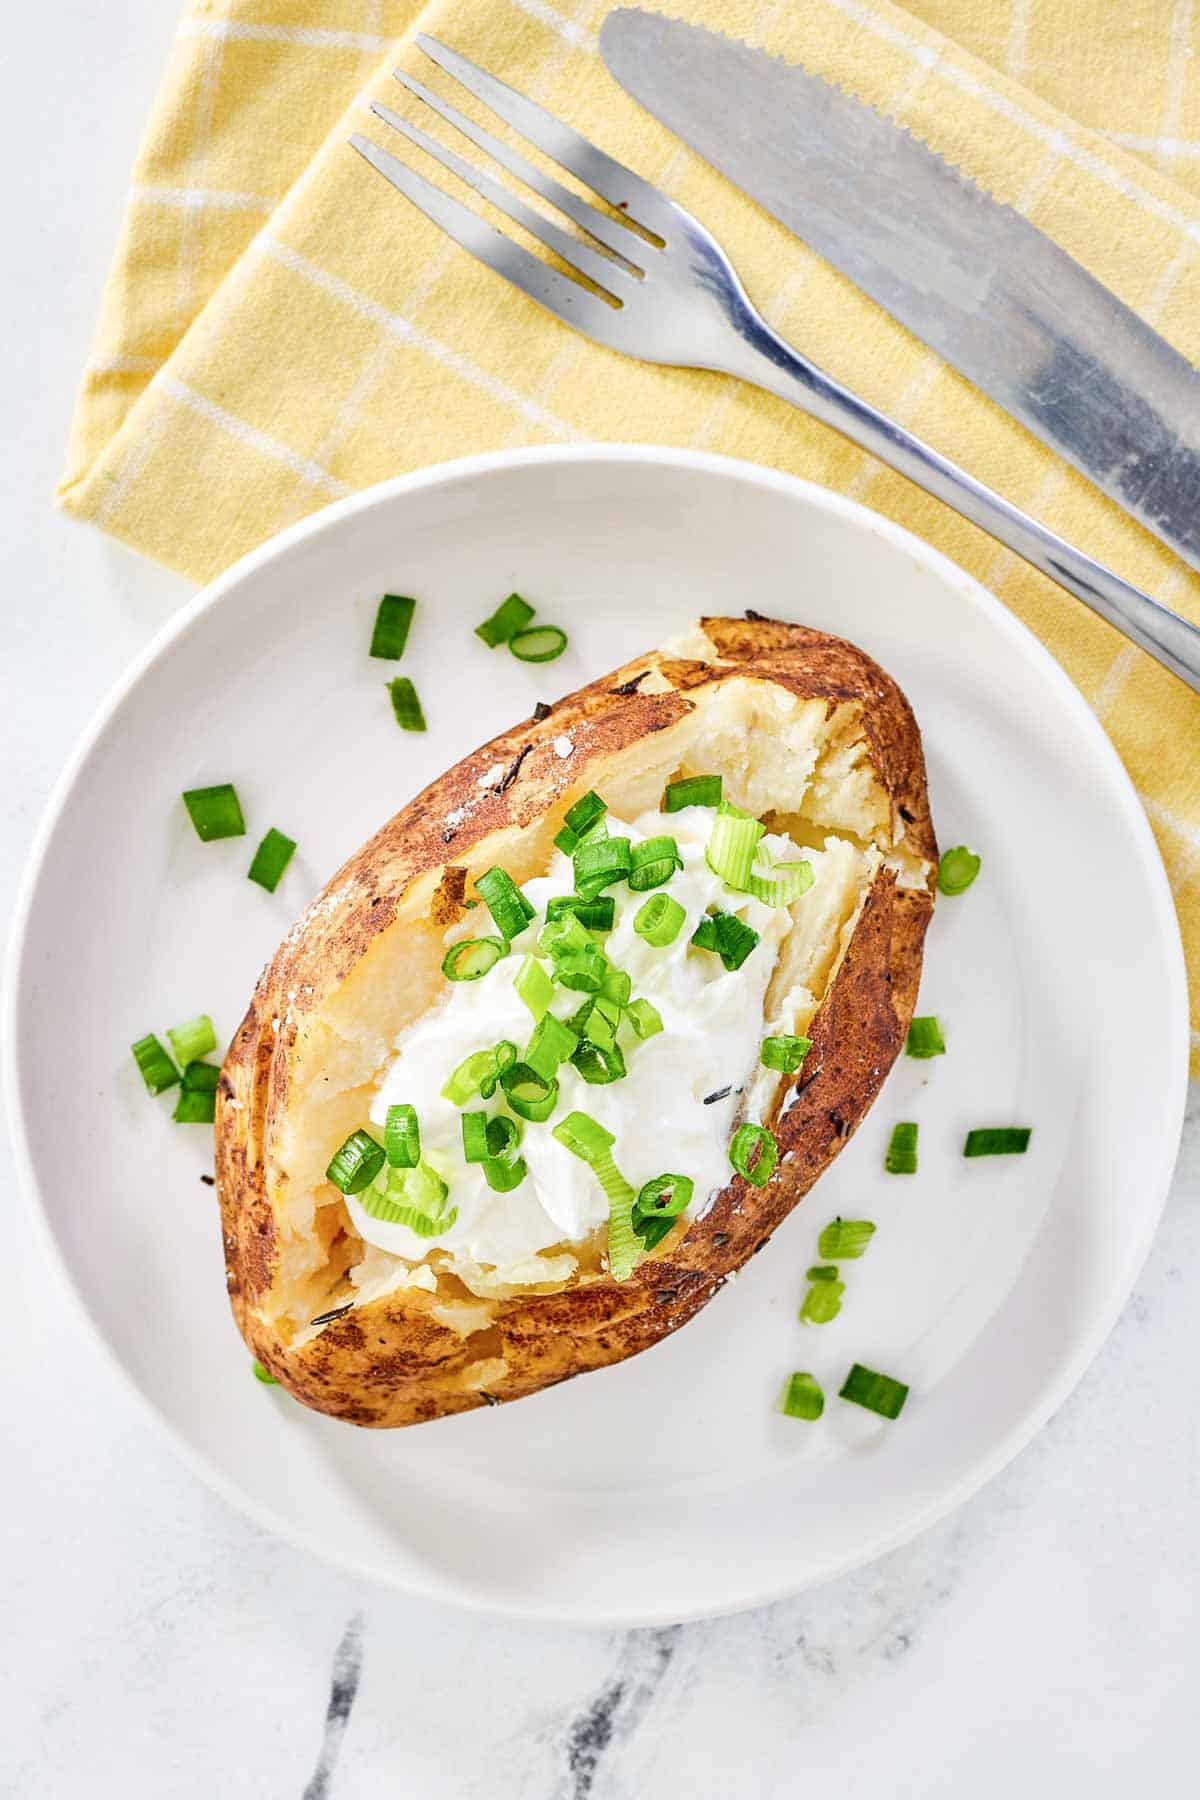 Grilled baked potato on a plate and a knife and fork on a cloth napkin.